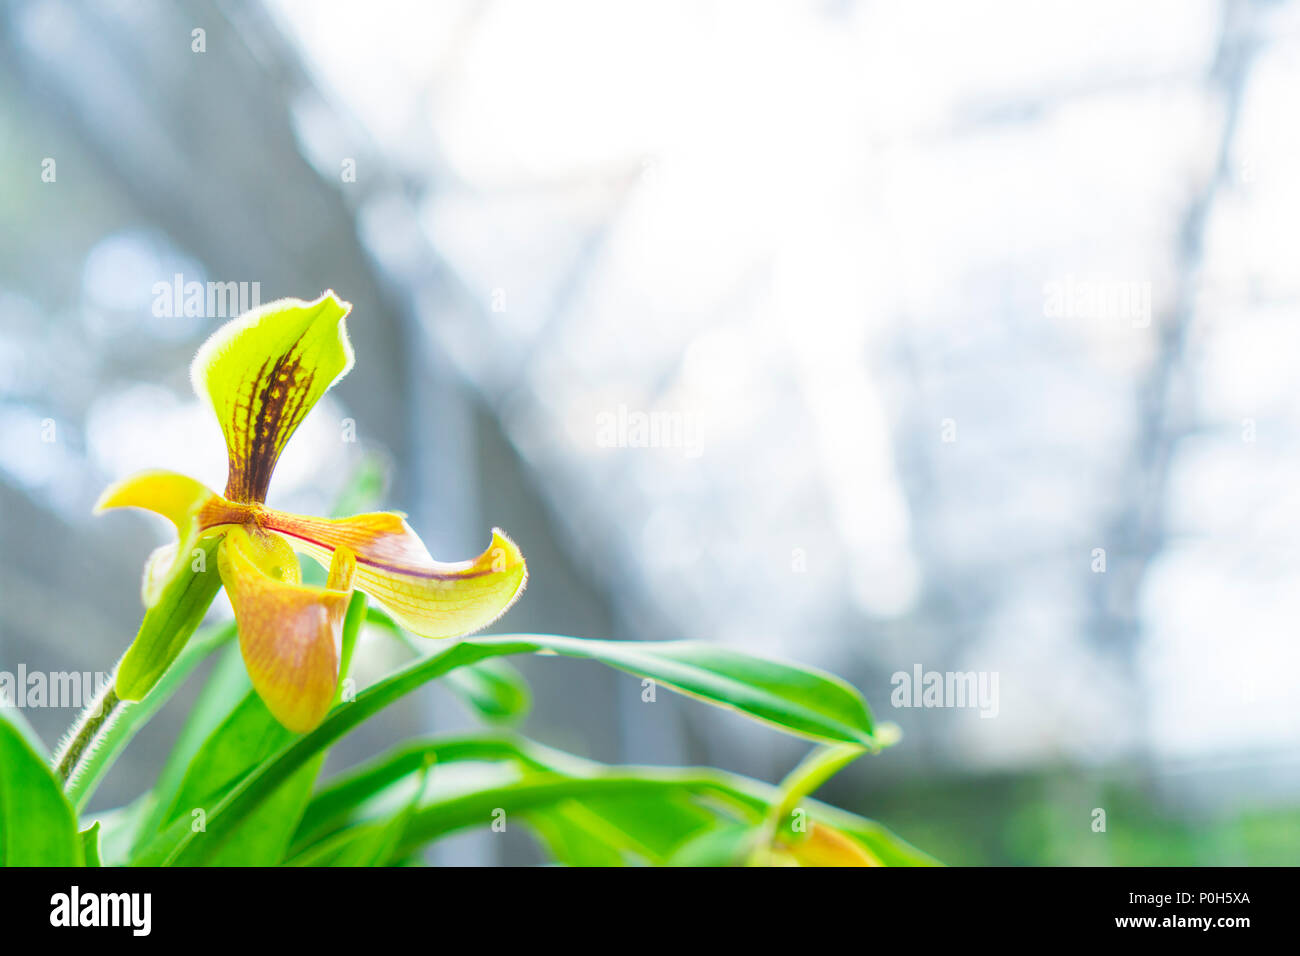 Paphiopedilum orchid flower or Lady's Slipper orchid in Conservation Center Paphiopedilum Doi Inthanon , Chiang Mai, Thailand. Stock Photo